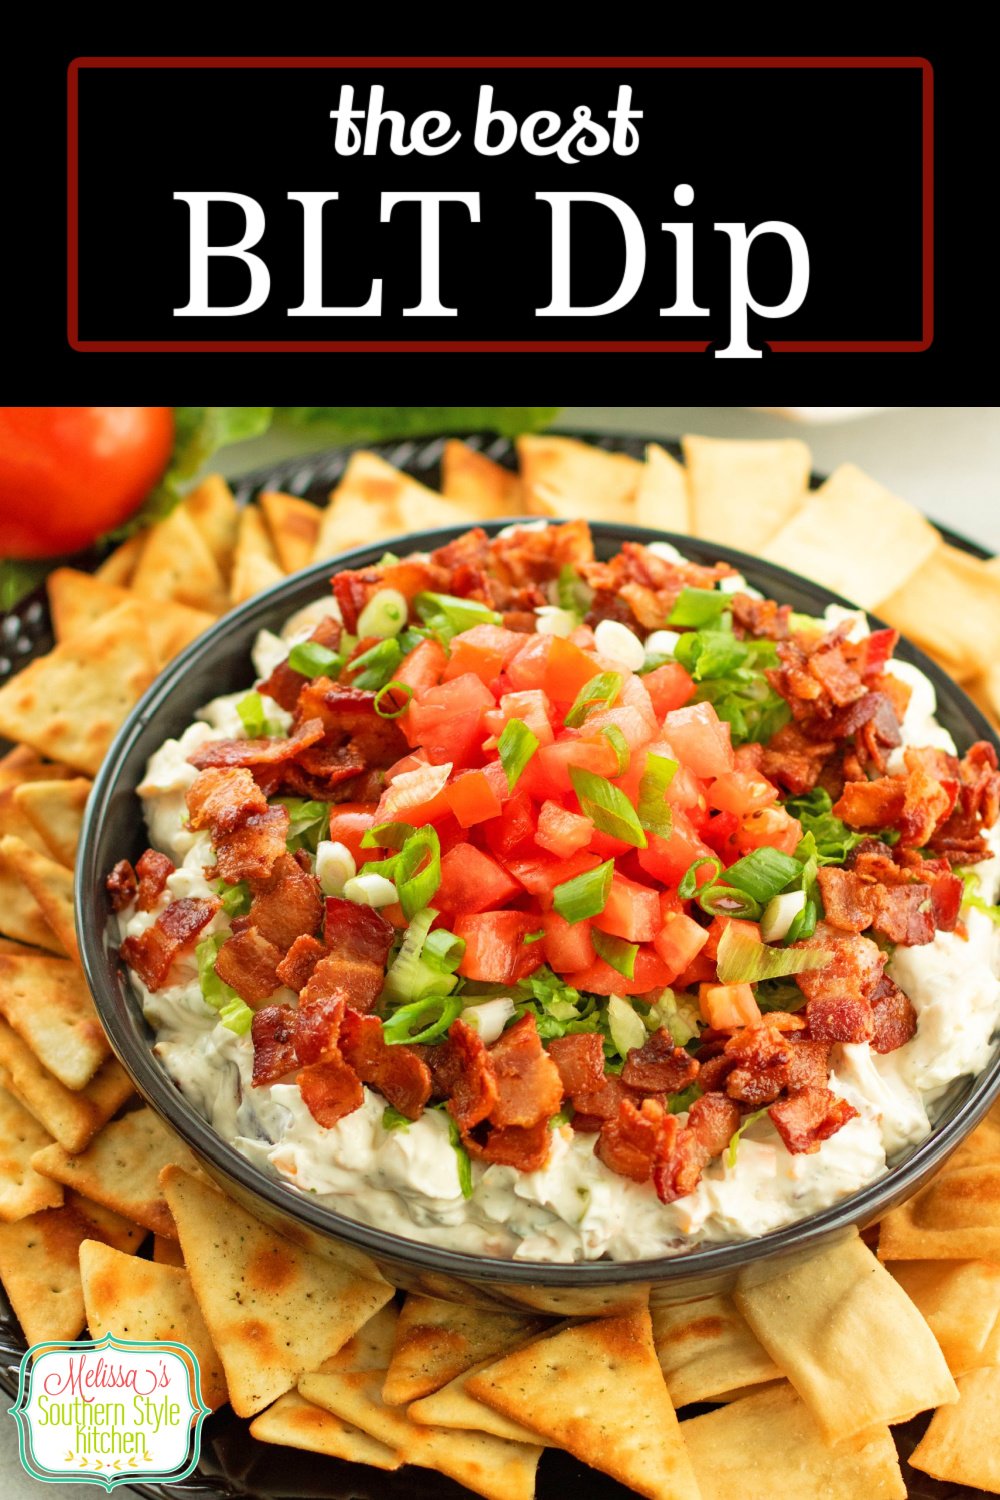 This creamy BLT Dip recipe features classic flavors making it a delicious dip to serve with crostini, garlic bread or pita chips for dipping. #BLT #BLTdip #diprecipes #bacon #bacondip #superbowlrecipes #easydiprecipes via @melissasssk